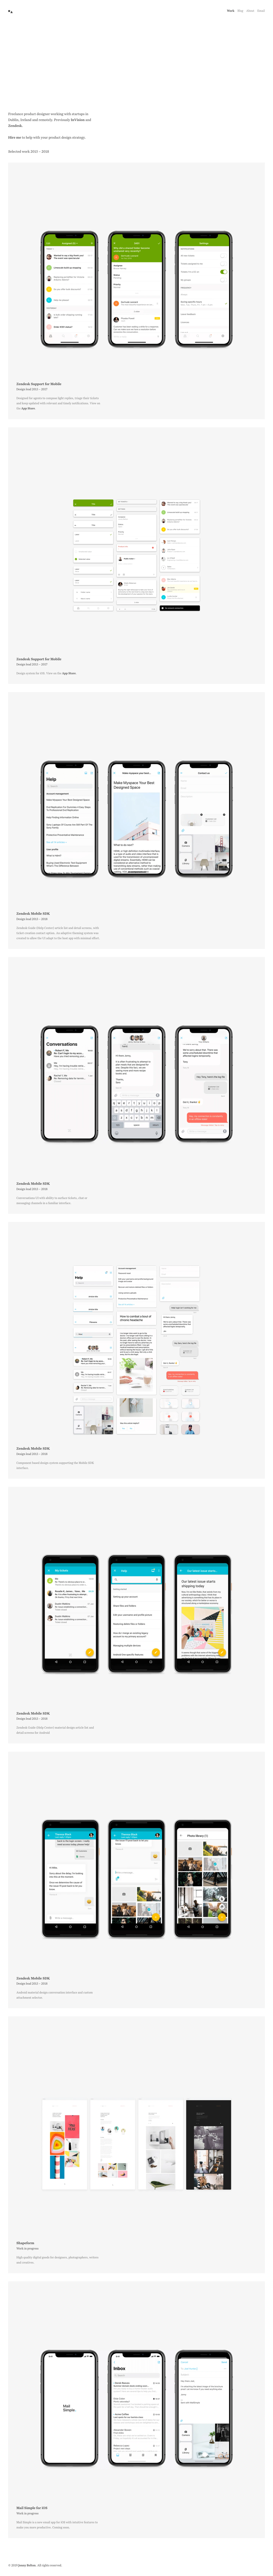 Jonny Belton Landing Page Example: Freelance product designer working with startups in Dublin, Ireland and remotely. Previously InVision and Zendesk. Experience managing design teams, visual and ux for iPhone, iPad, Android and Web products.